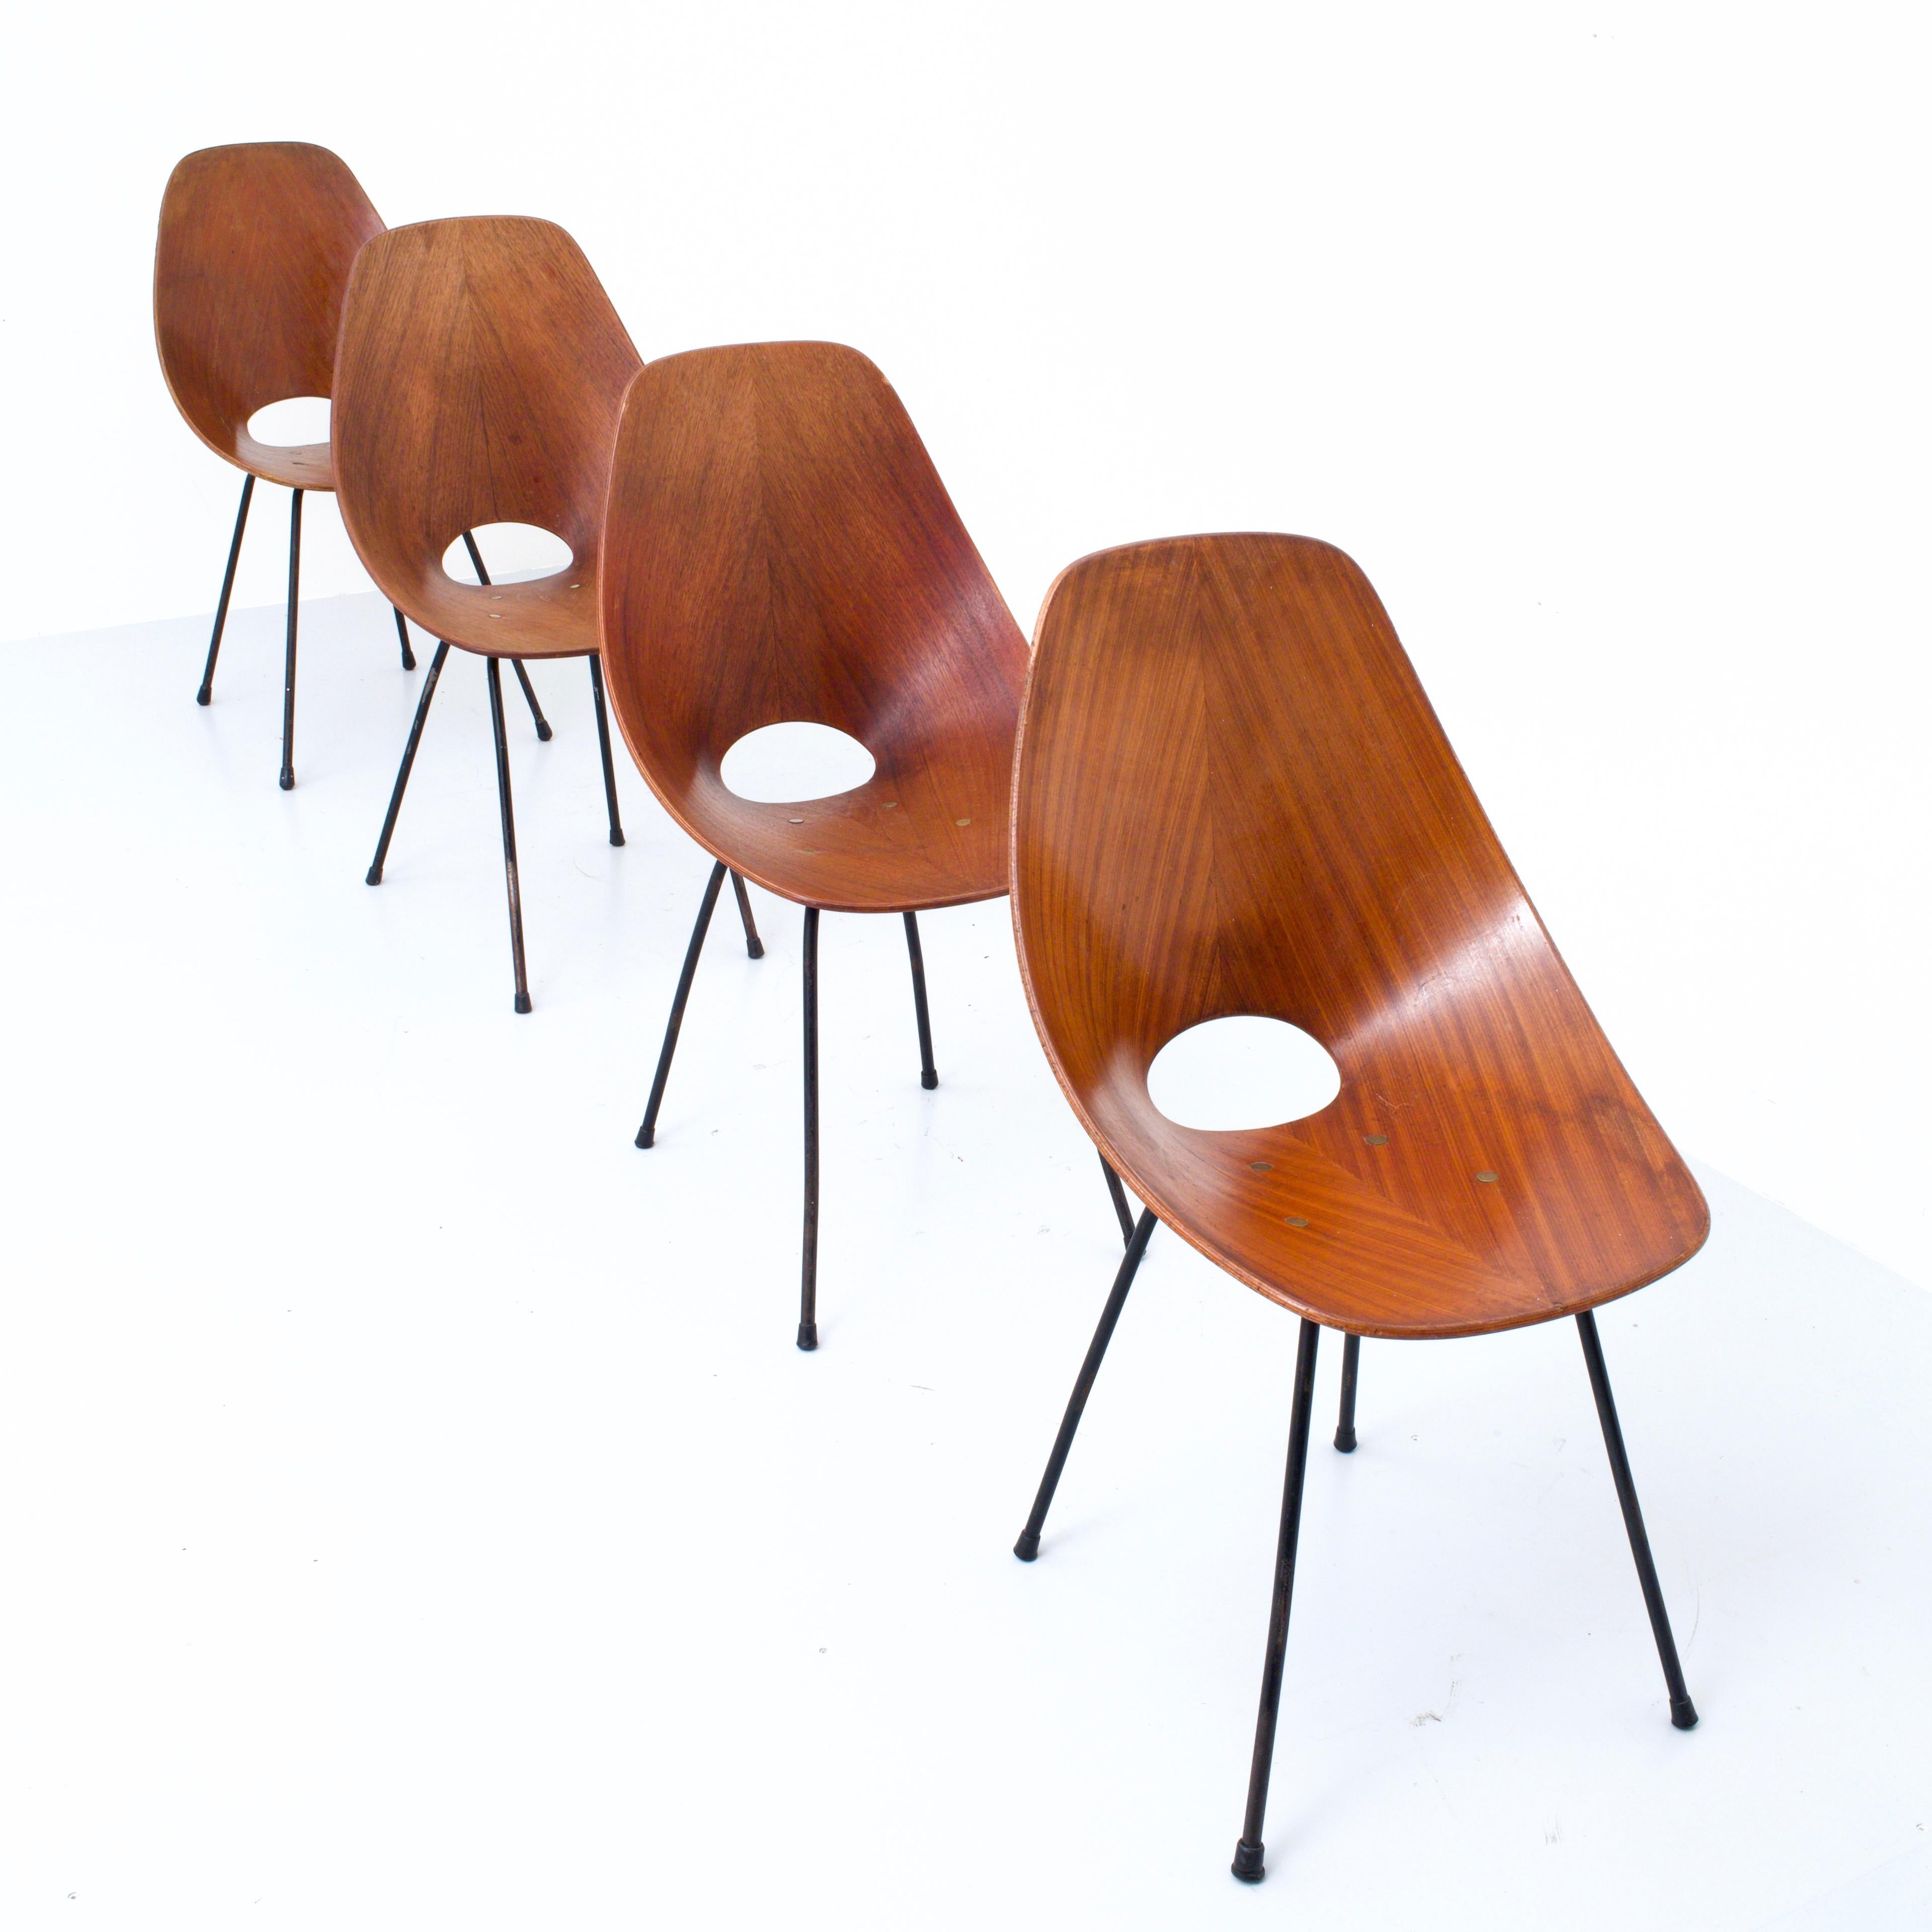 Mid-20th Century Set of 4 Medea Dining Chairs by Vitorio Nobili for Fratelli Tagliabue, 1955 For Sale